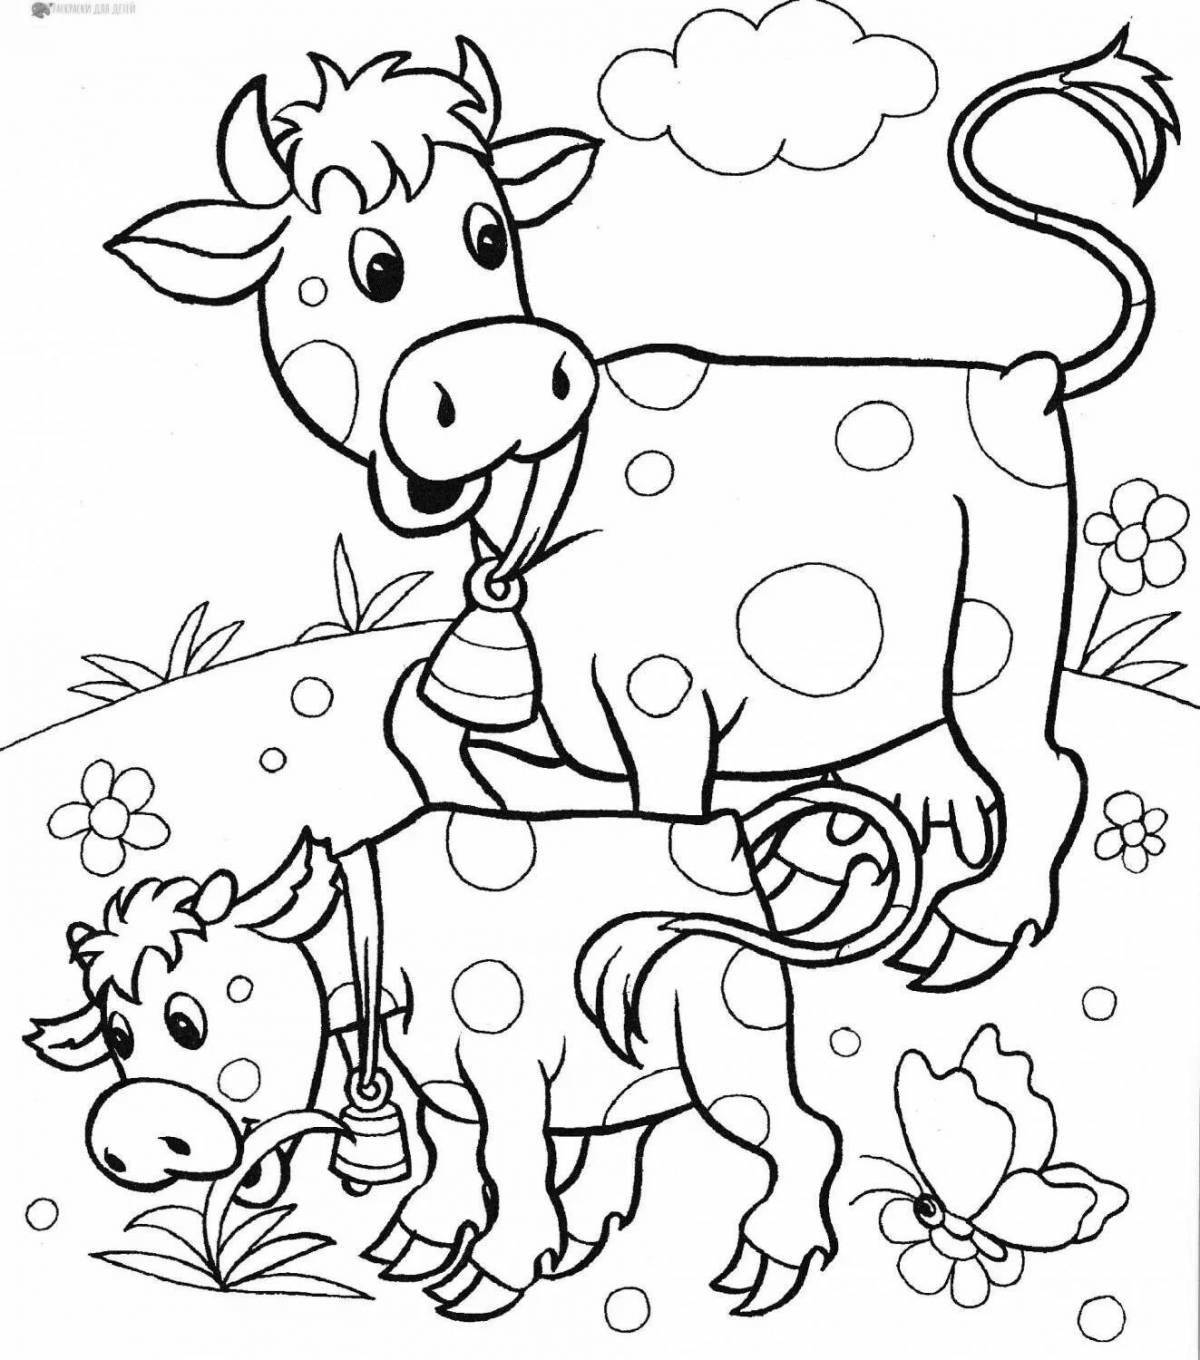 Coloring page nice cow and calf